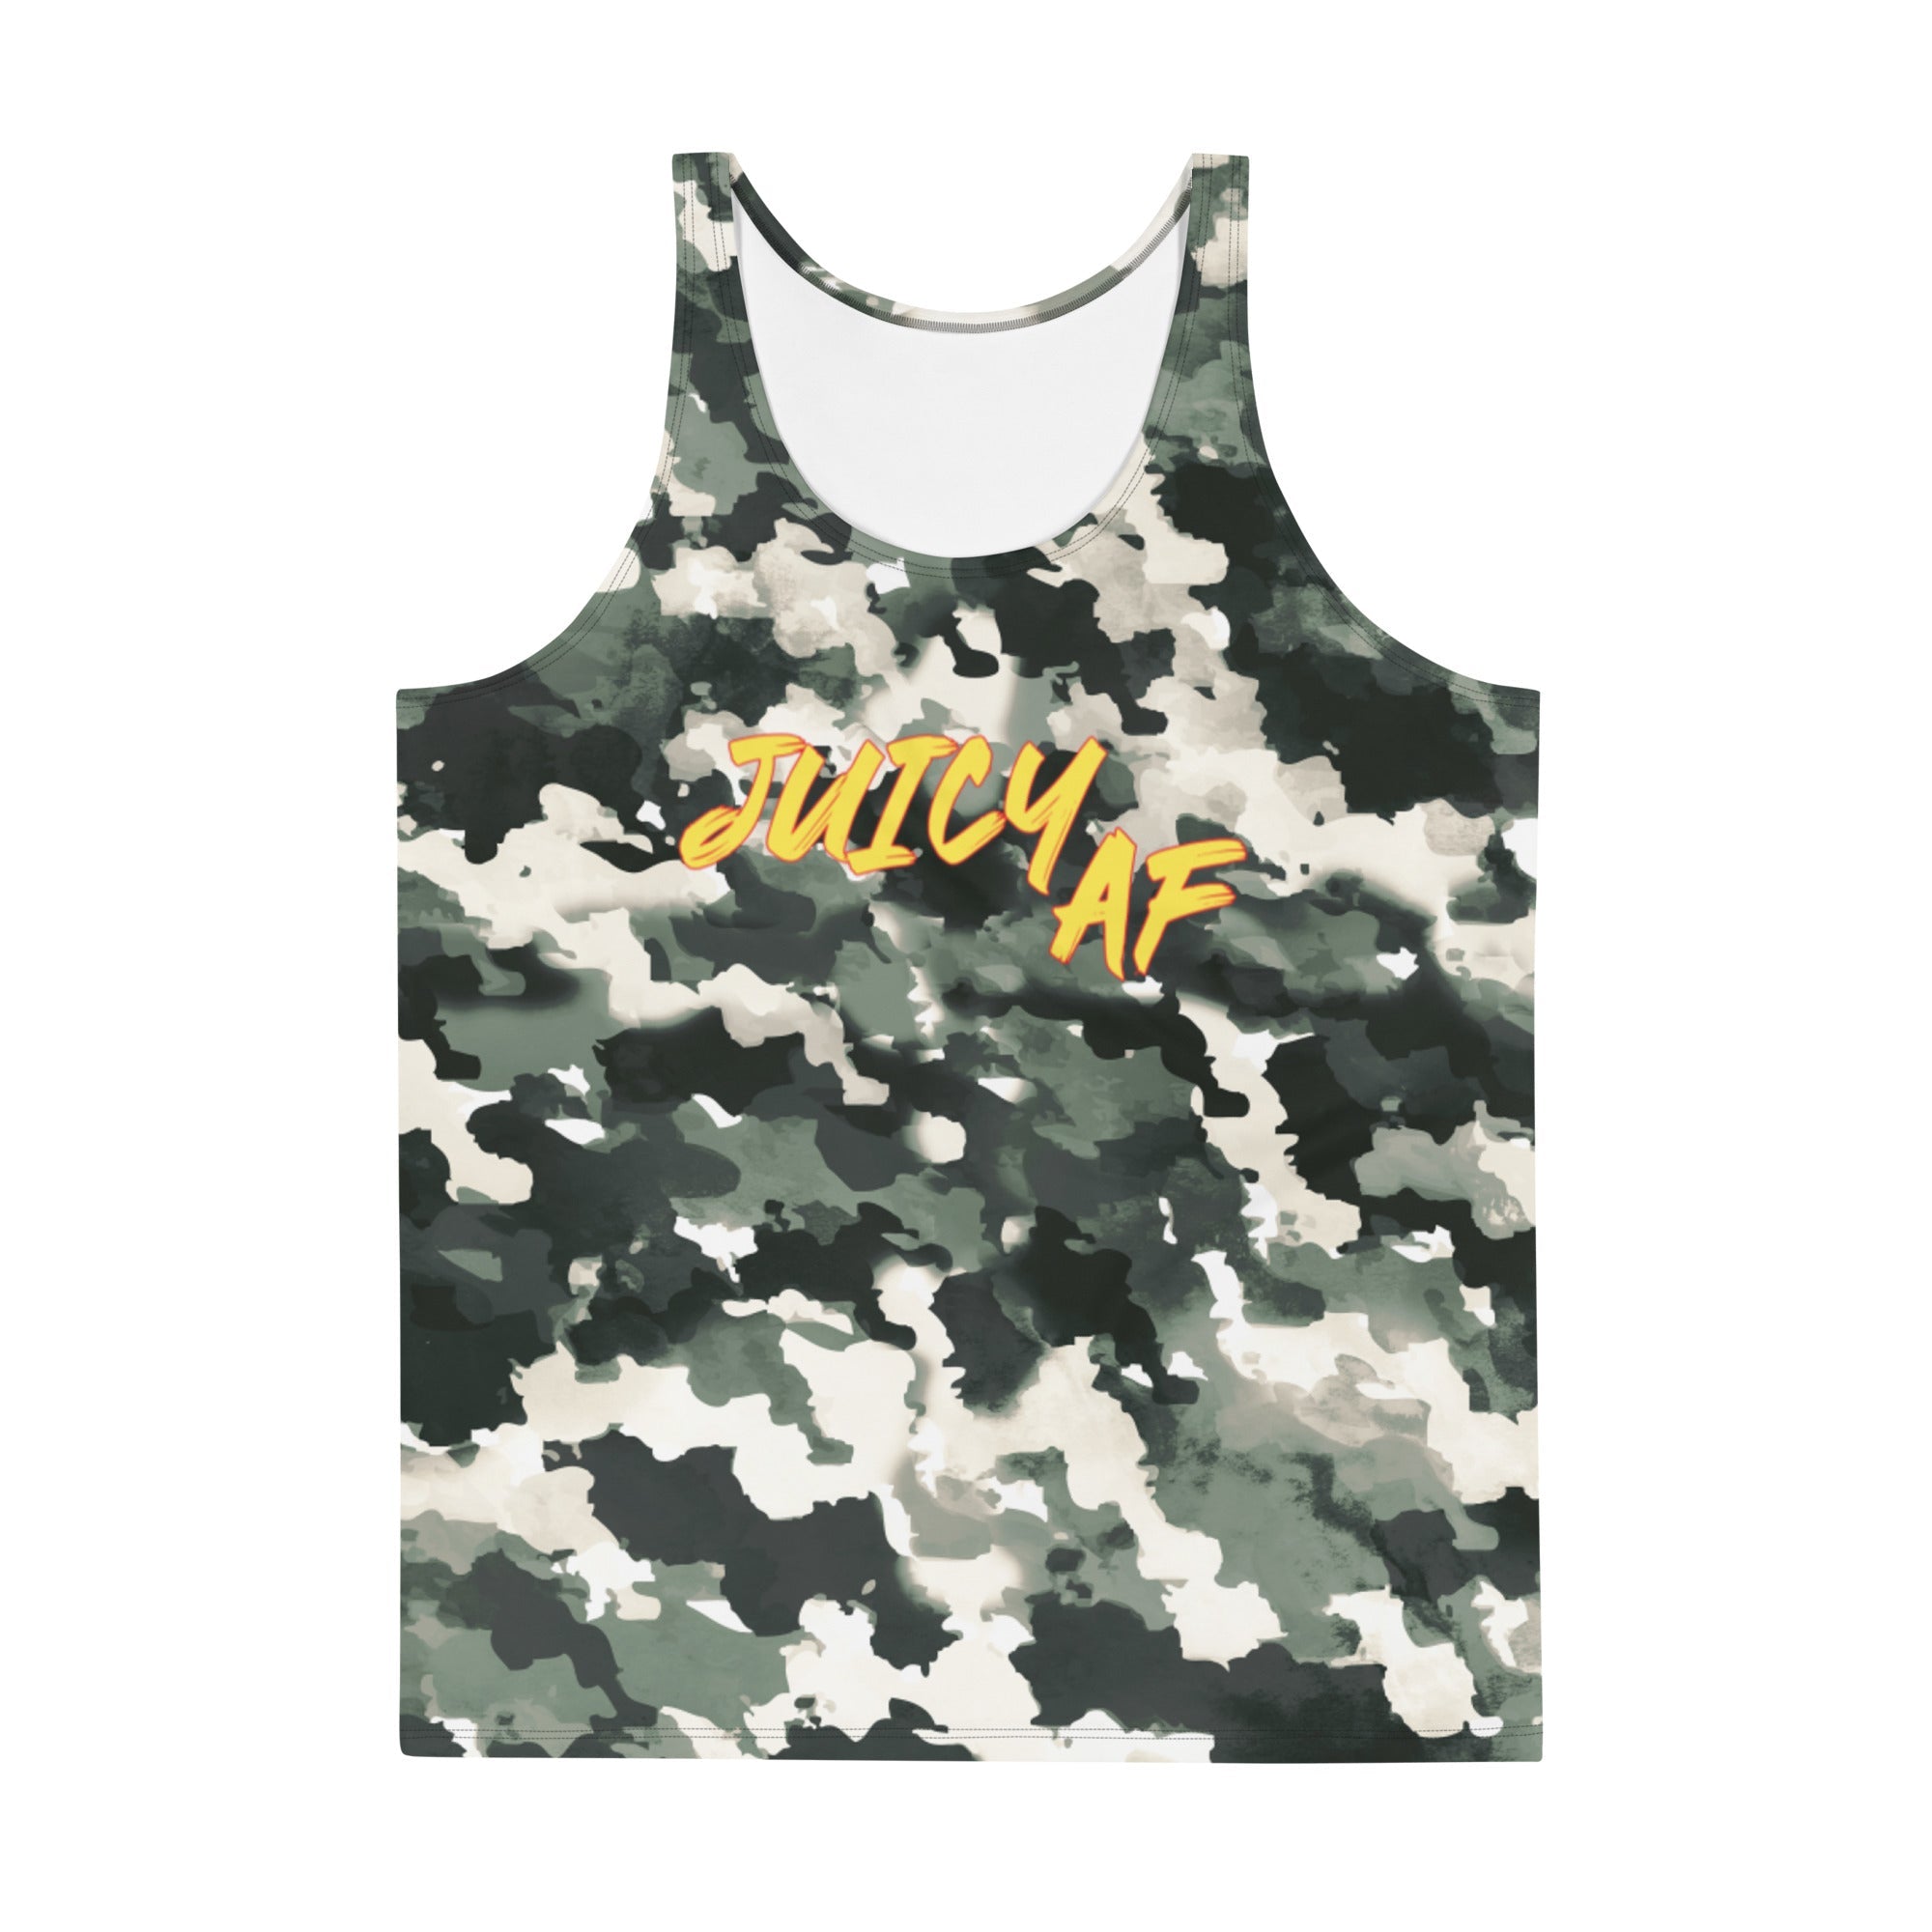 CAMO Juicy AF Tank - Krazy Muscle Nutrition Krazy Muscle Nutrition3019995_9049